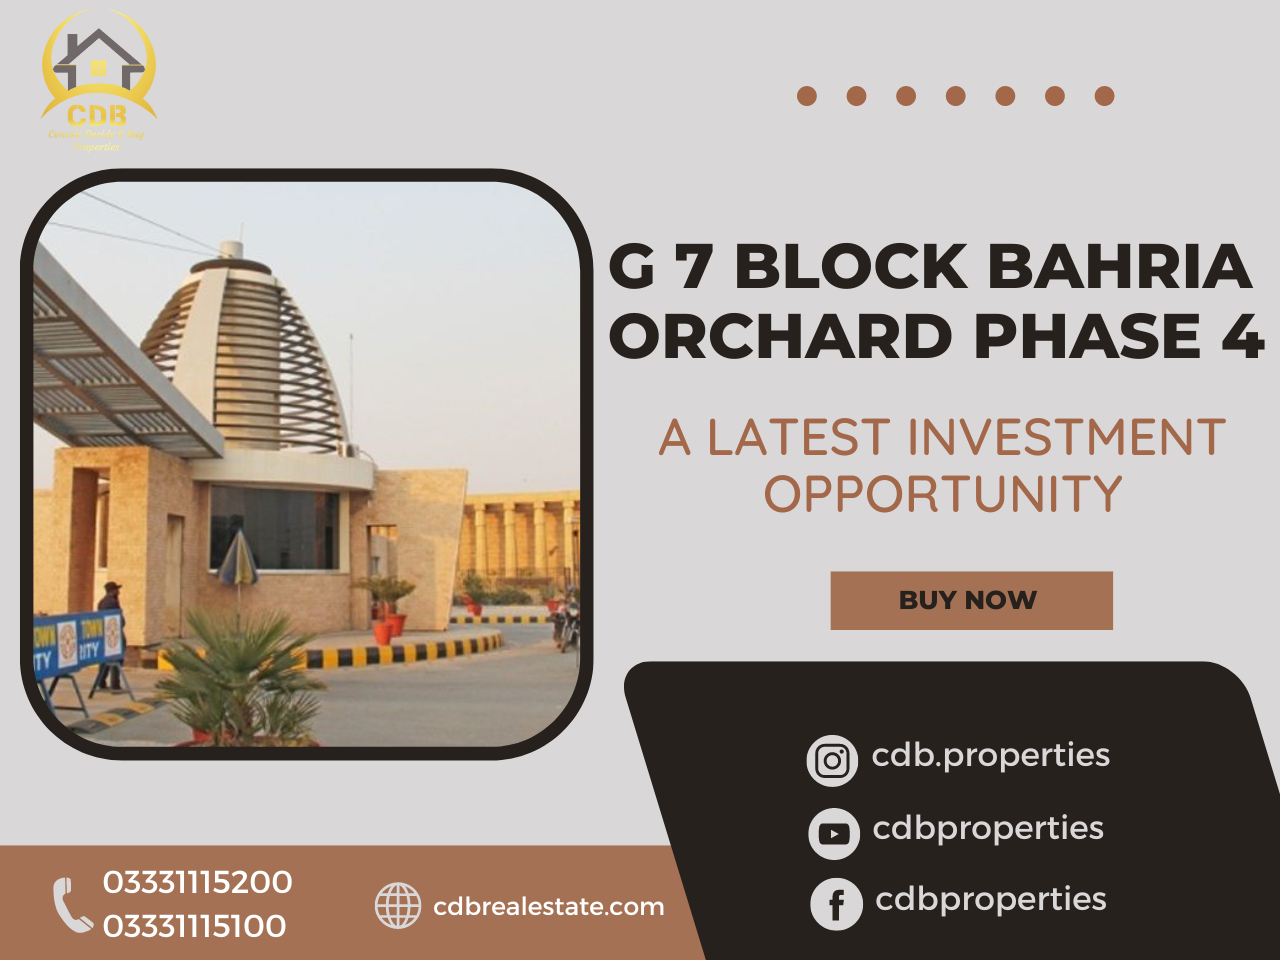 G 7 Block Bahria Orchard Phase 4